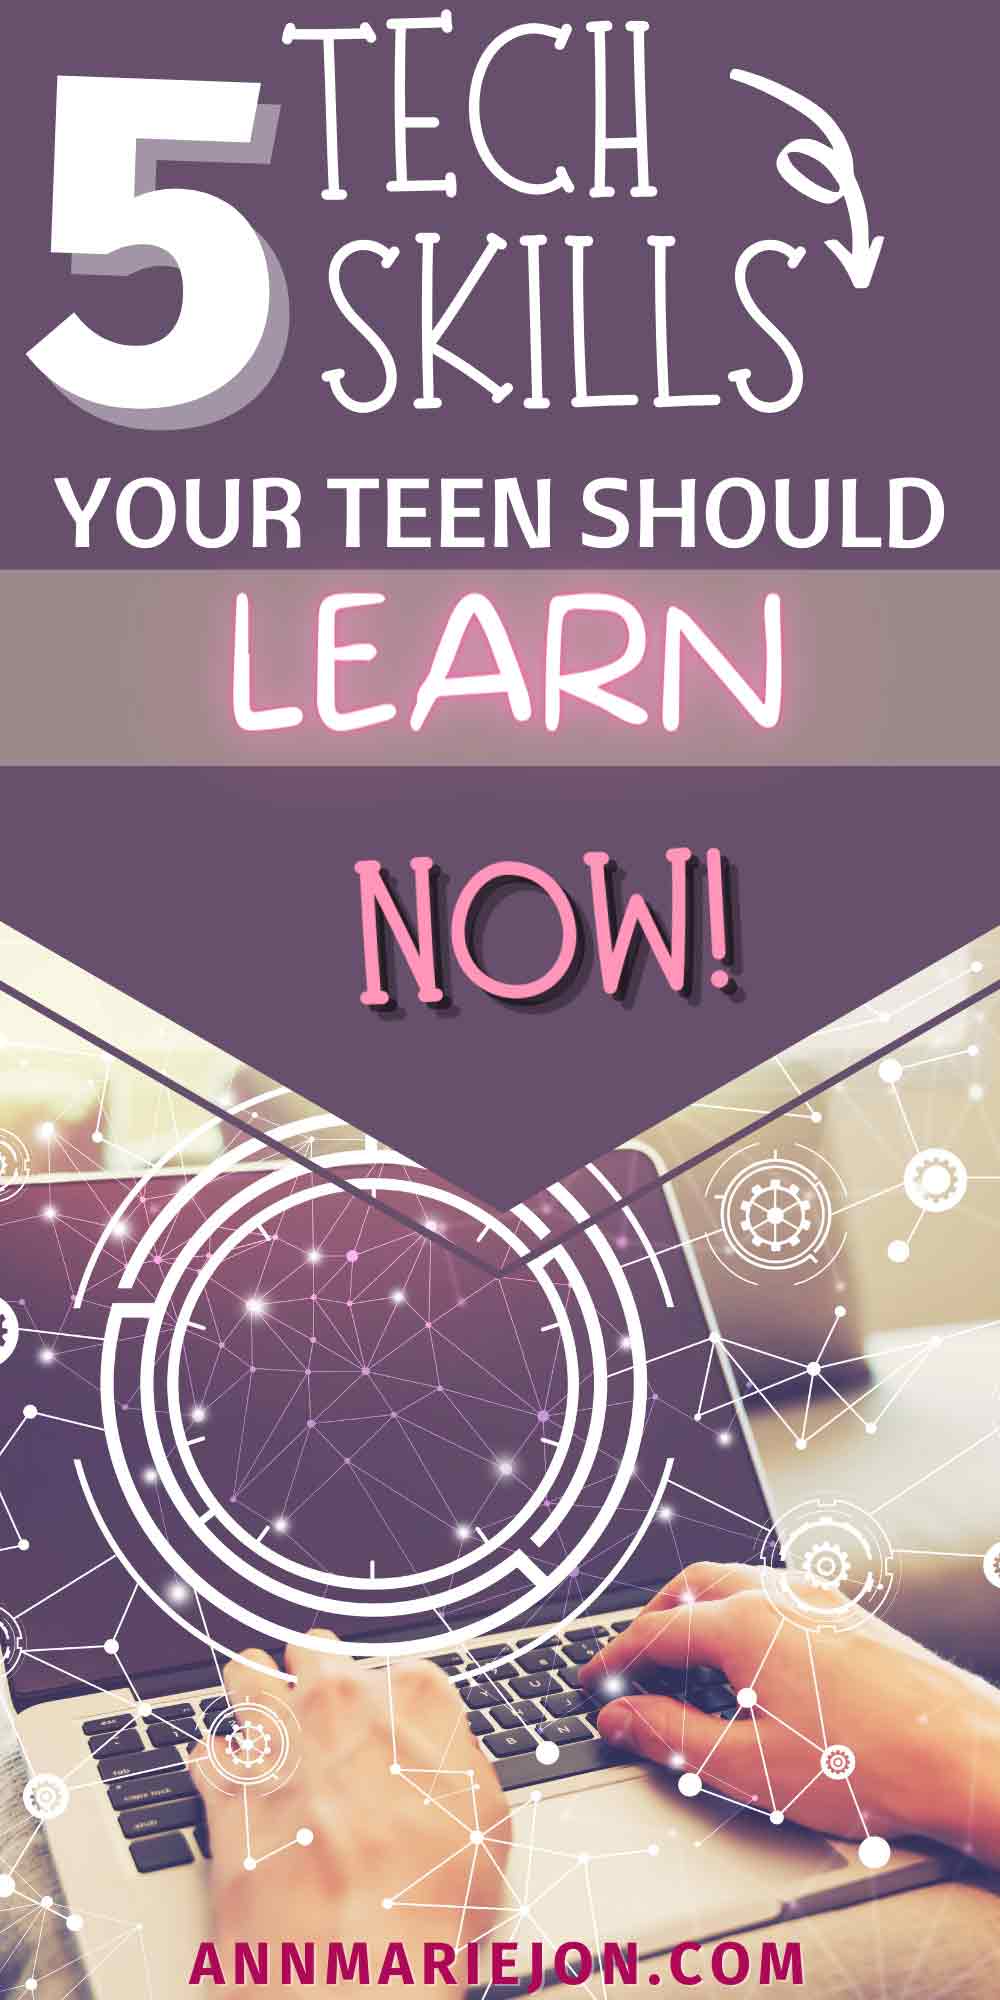 Tech Skills Your Teenager Should Learn